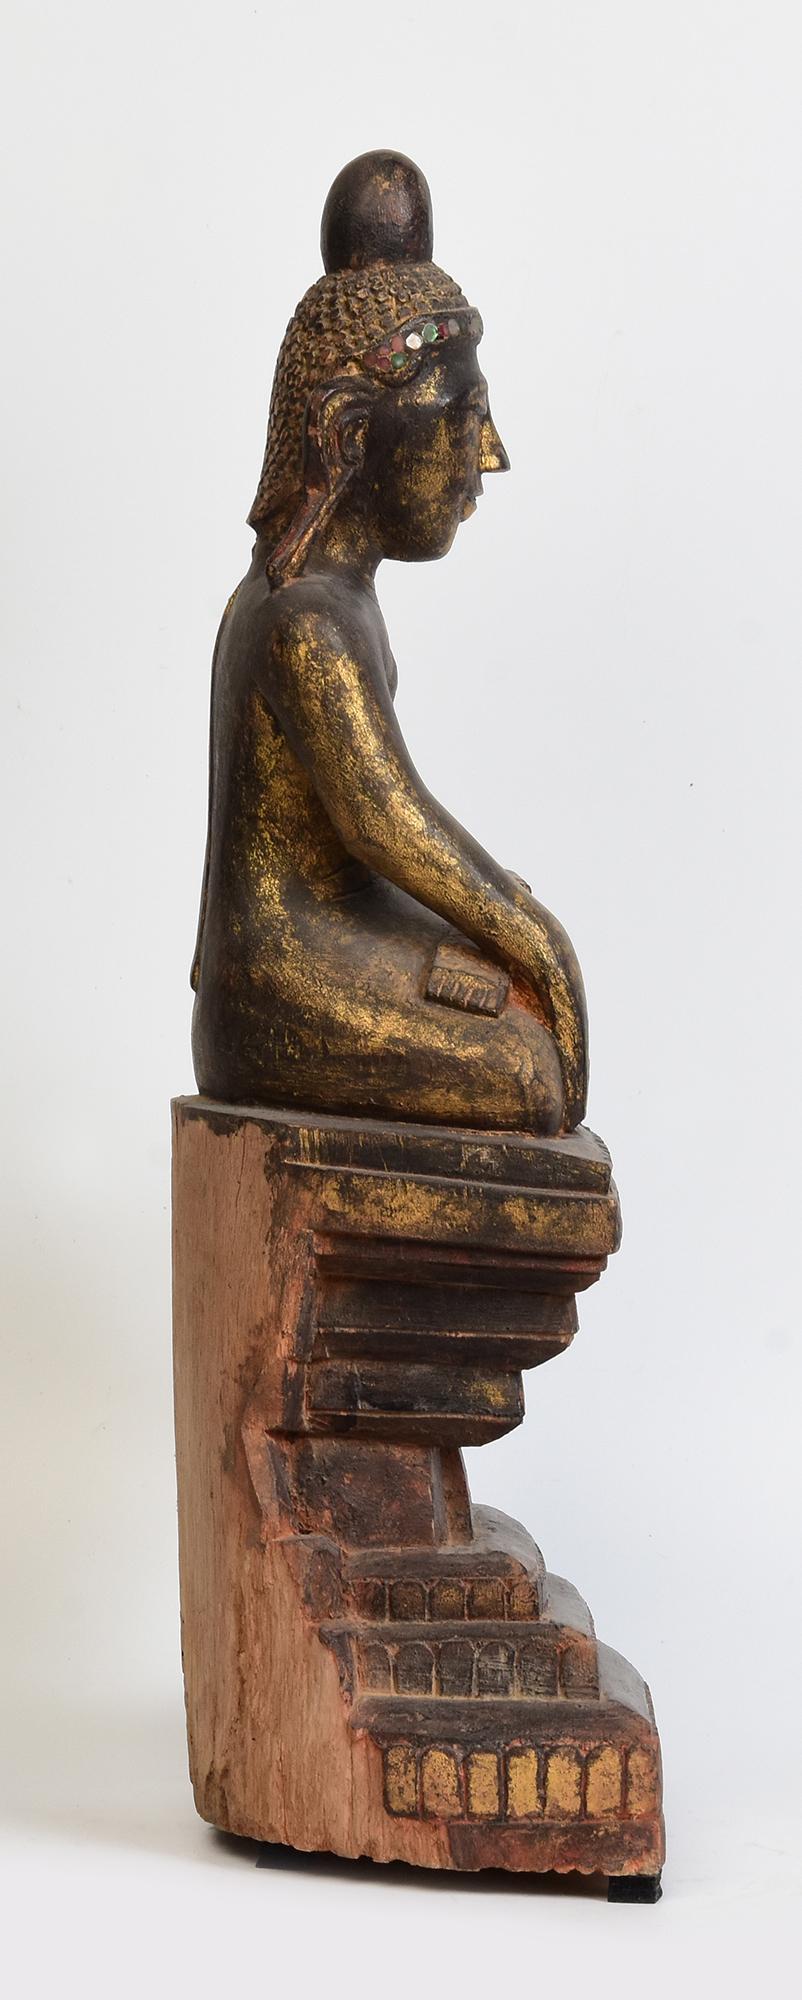 18th Century, Shan, Antique Burmese Wooden Seated Buddha For Sale 5